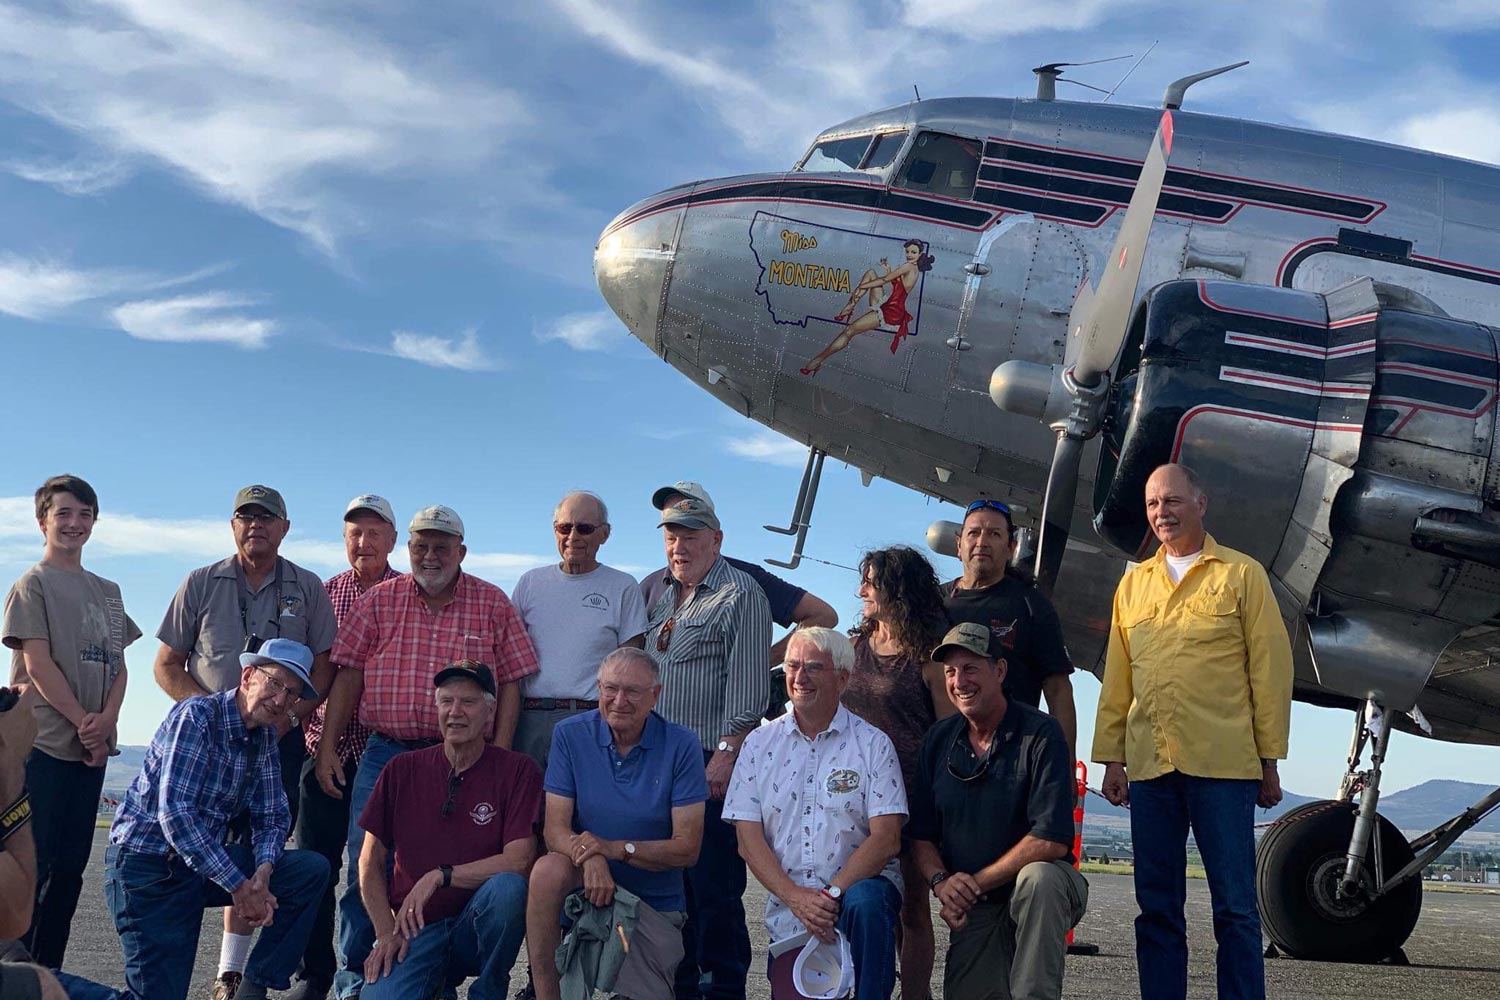 Miss Montana’s Crew Honors Smokejumpers in Memorial Drop